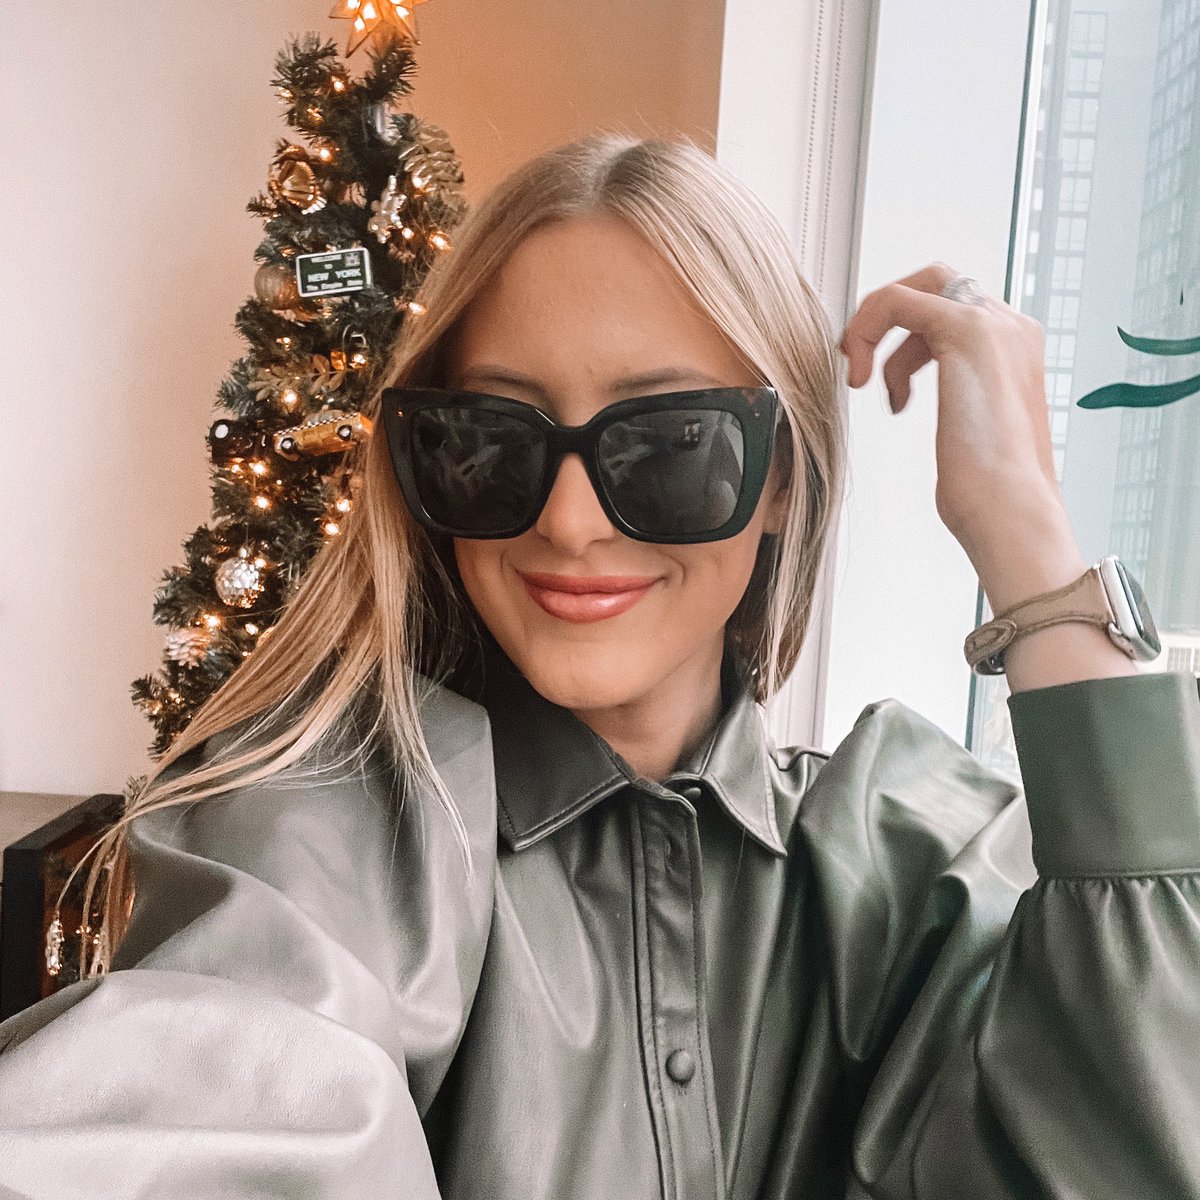 Add a dash of Lizzy to kick off the holiday season! Select frames are now up to 75% off, but not for long🎄 Get this and more of your faves for as low as $25 for a very limited time 🎁